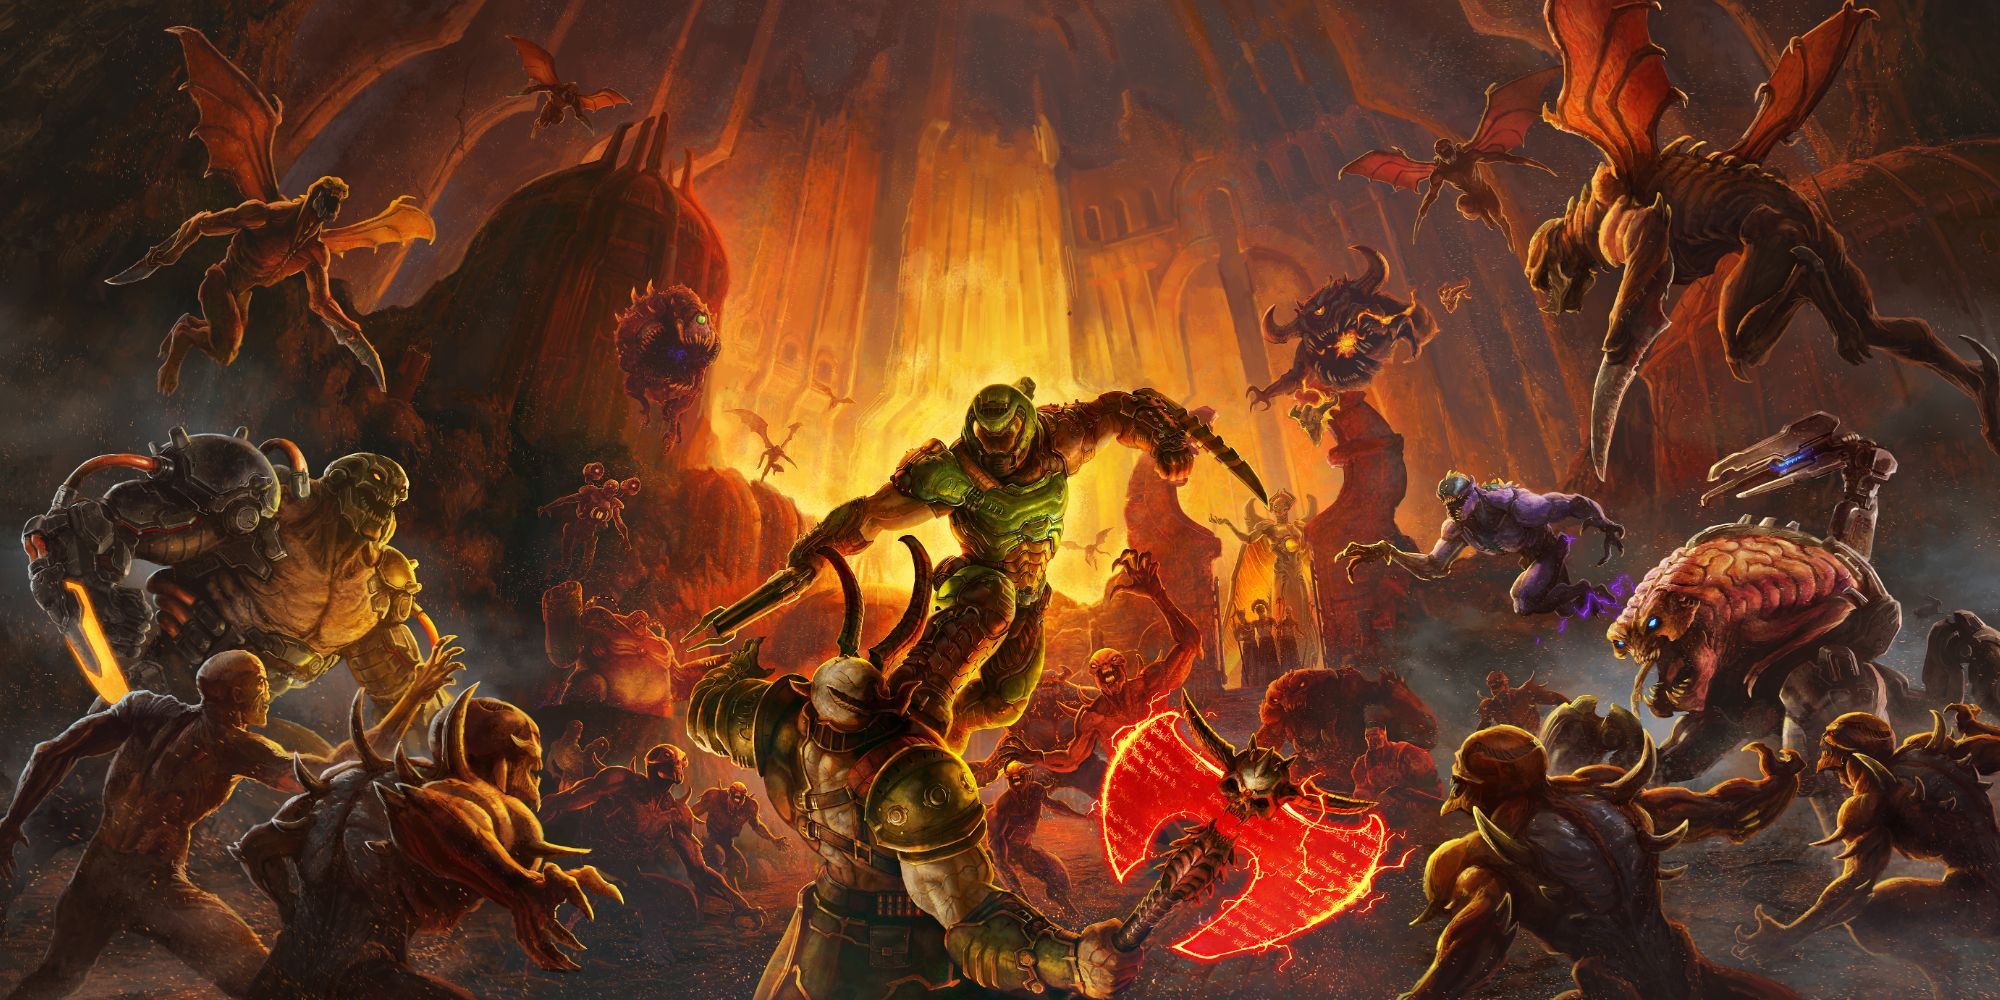 Doom Guy fighting monsters in a poster for the game DOOM Eternal